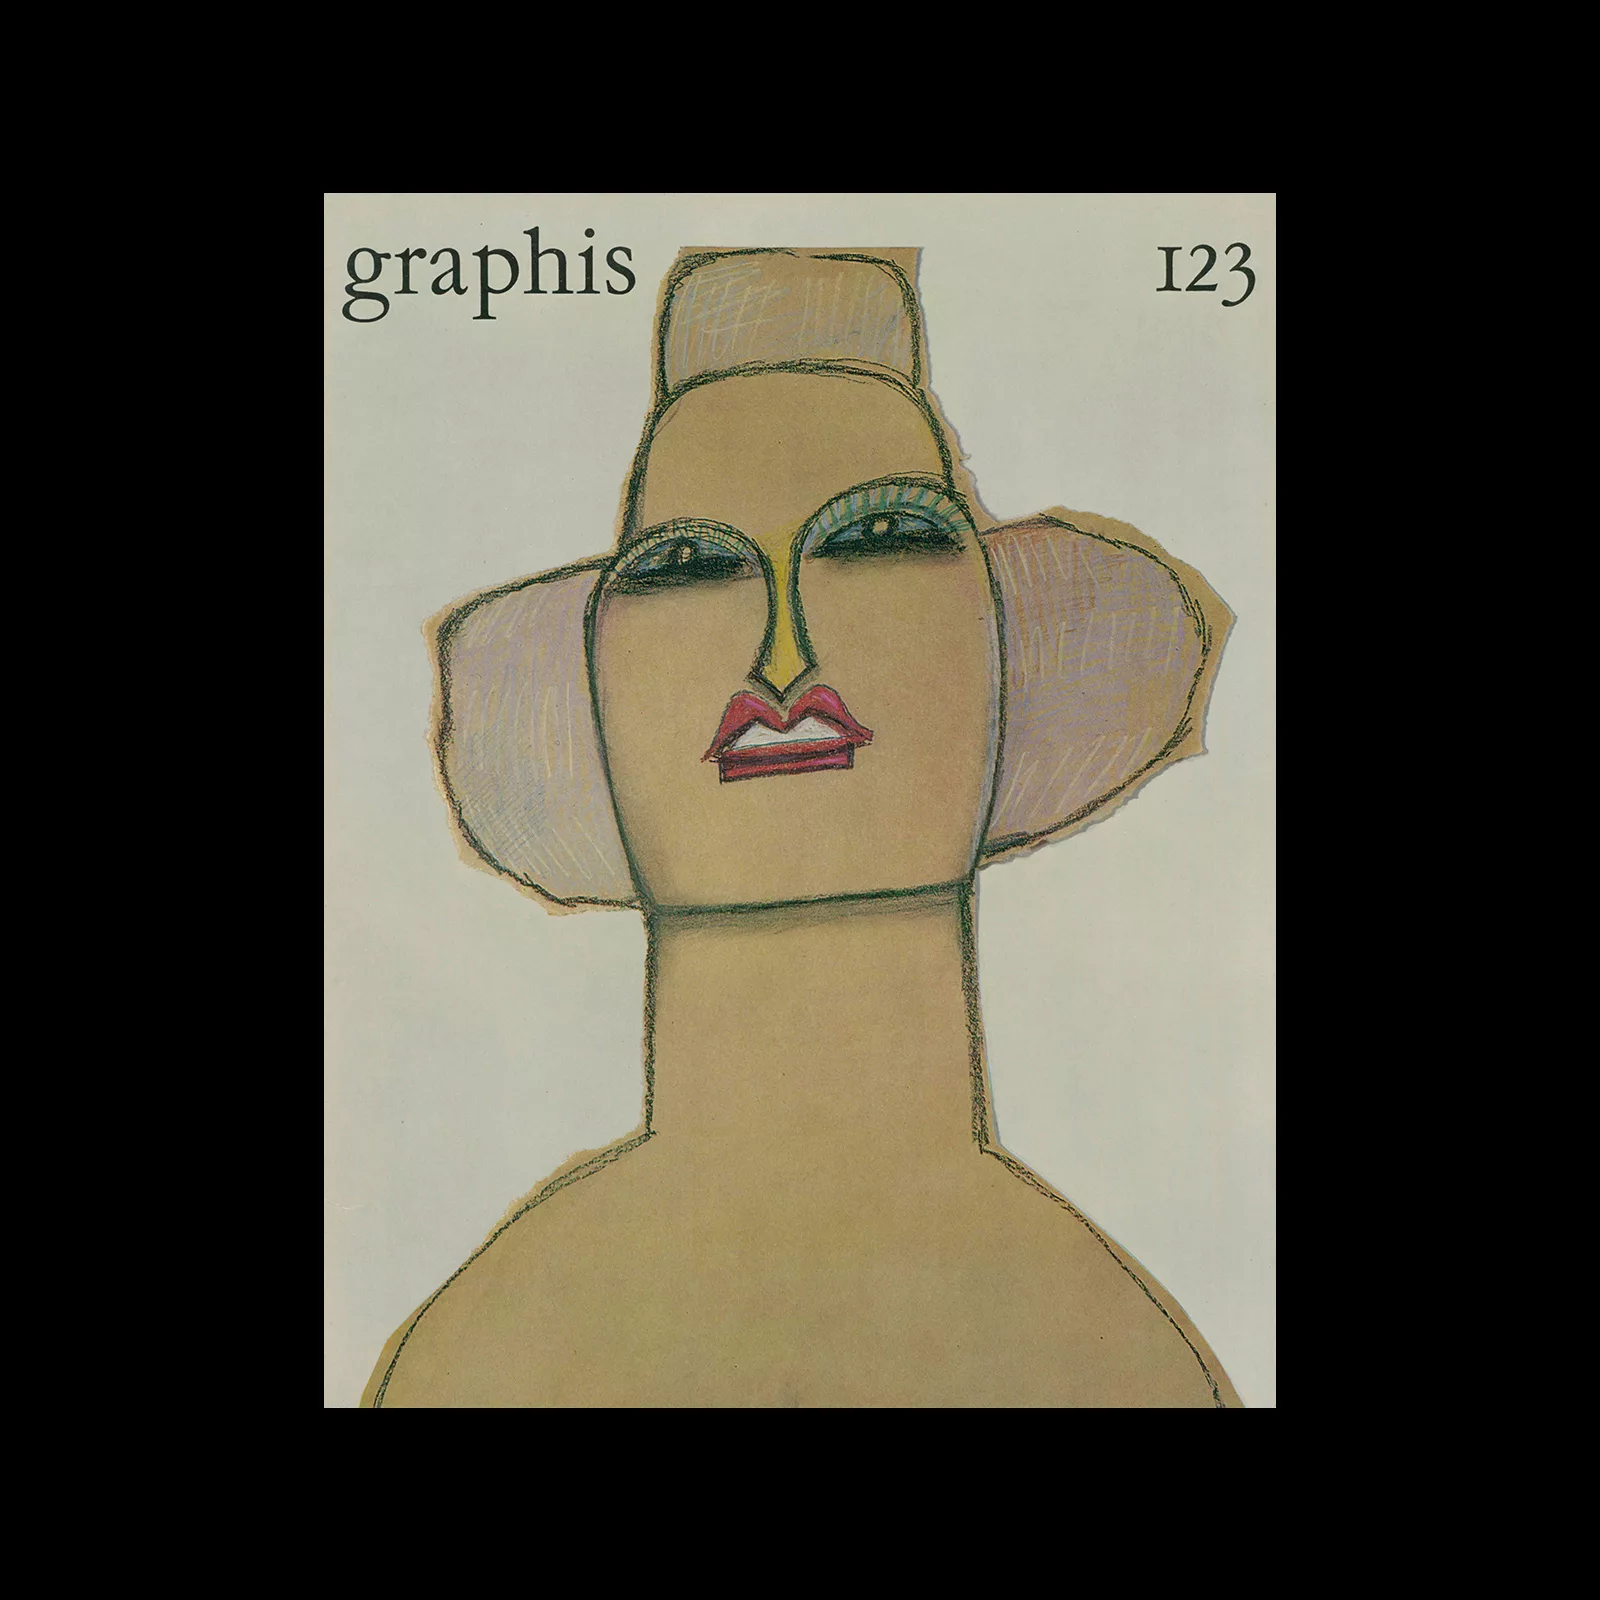 Graphis 123, 1966. Cover design by Saul Steinberg